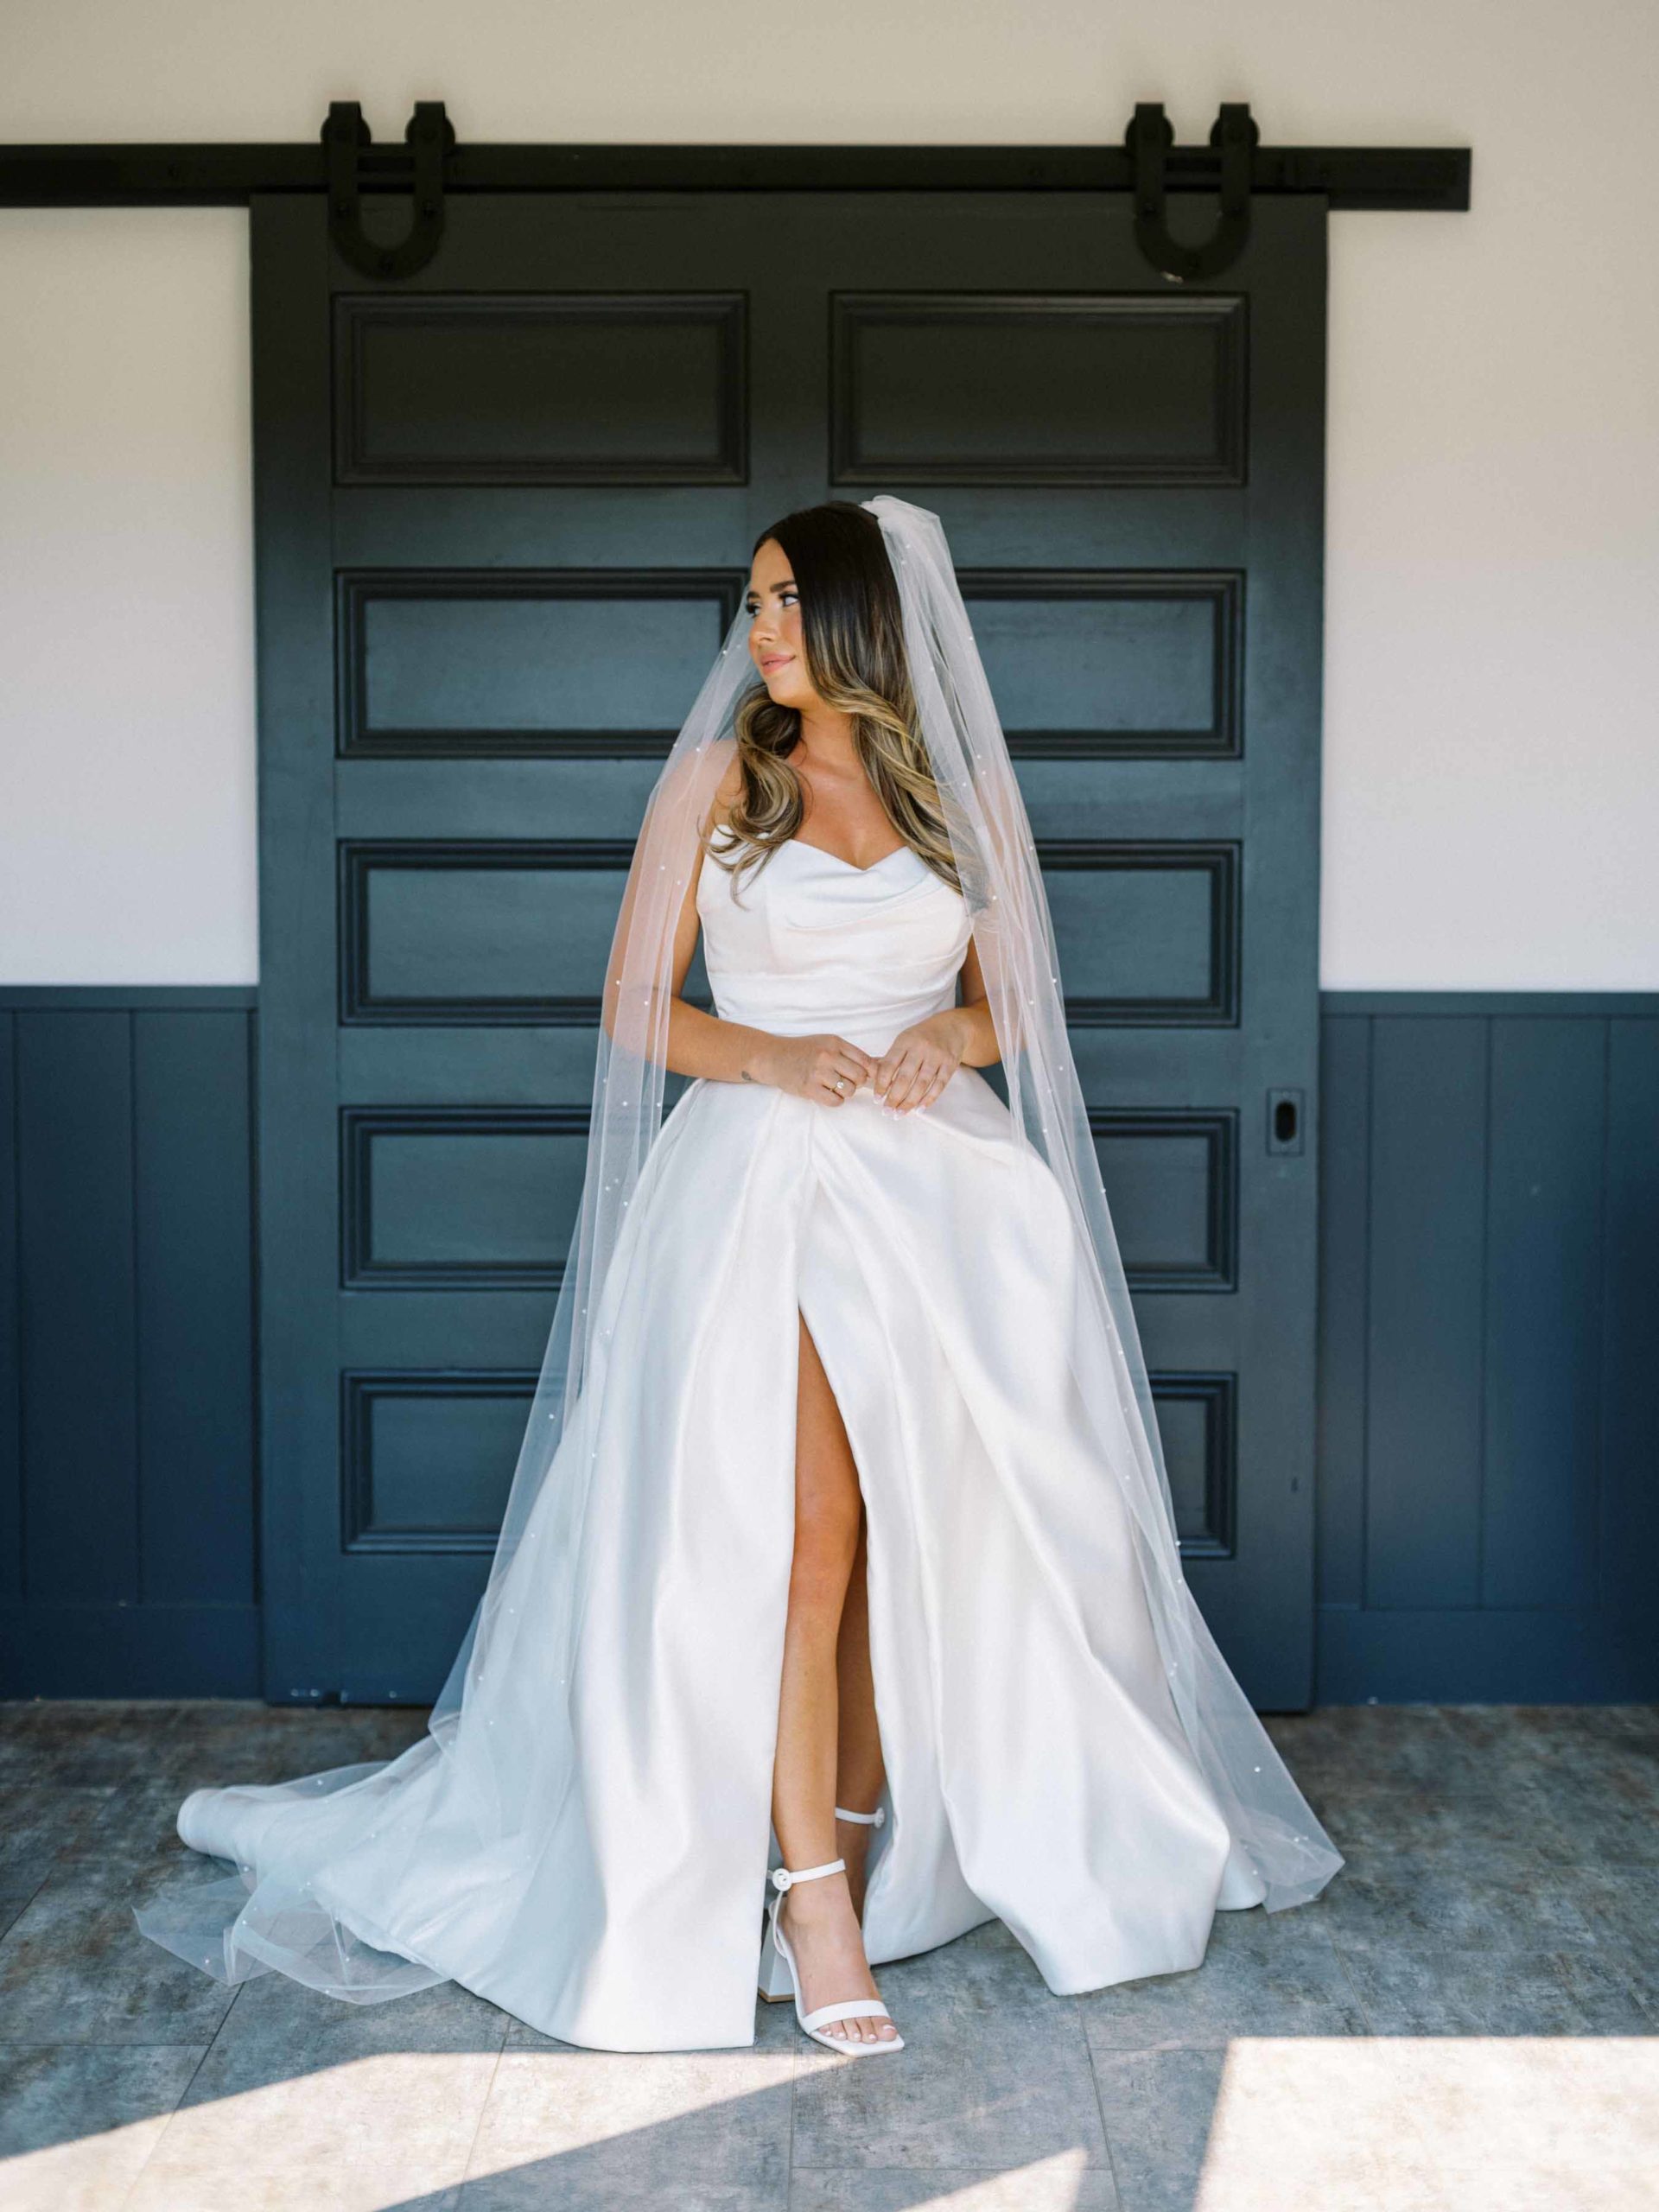 Hannah in wedding dress with slit in front of black doors